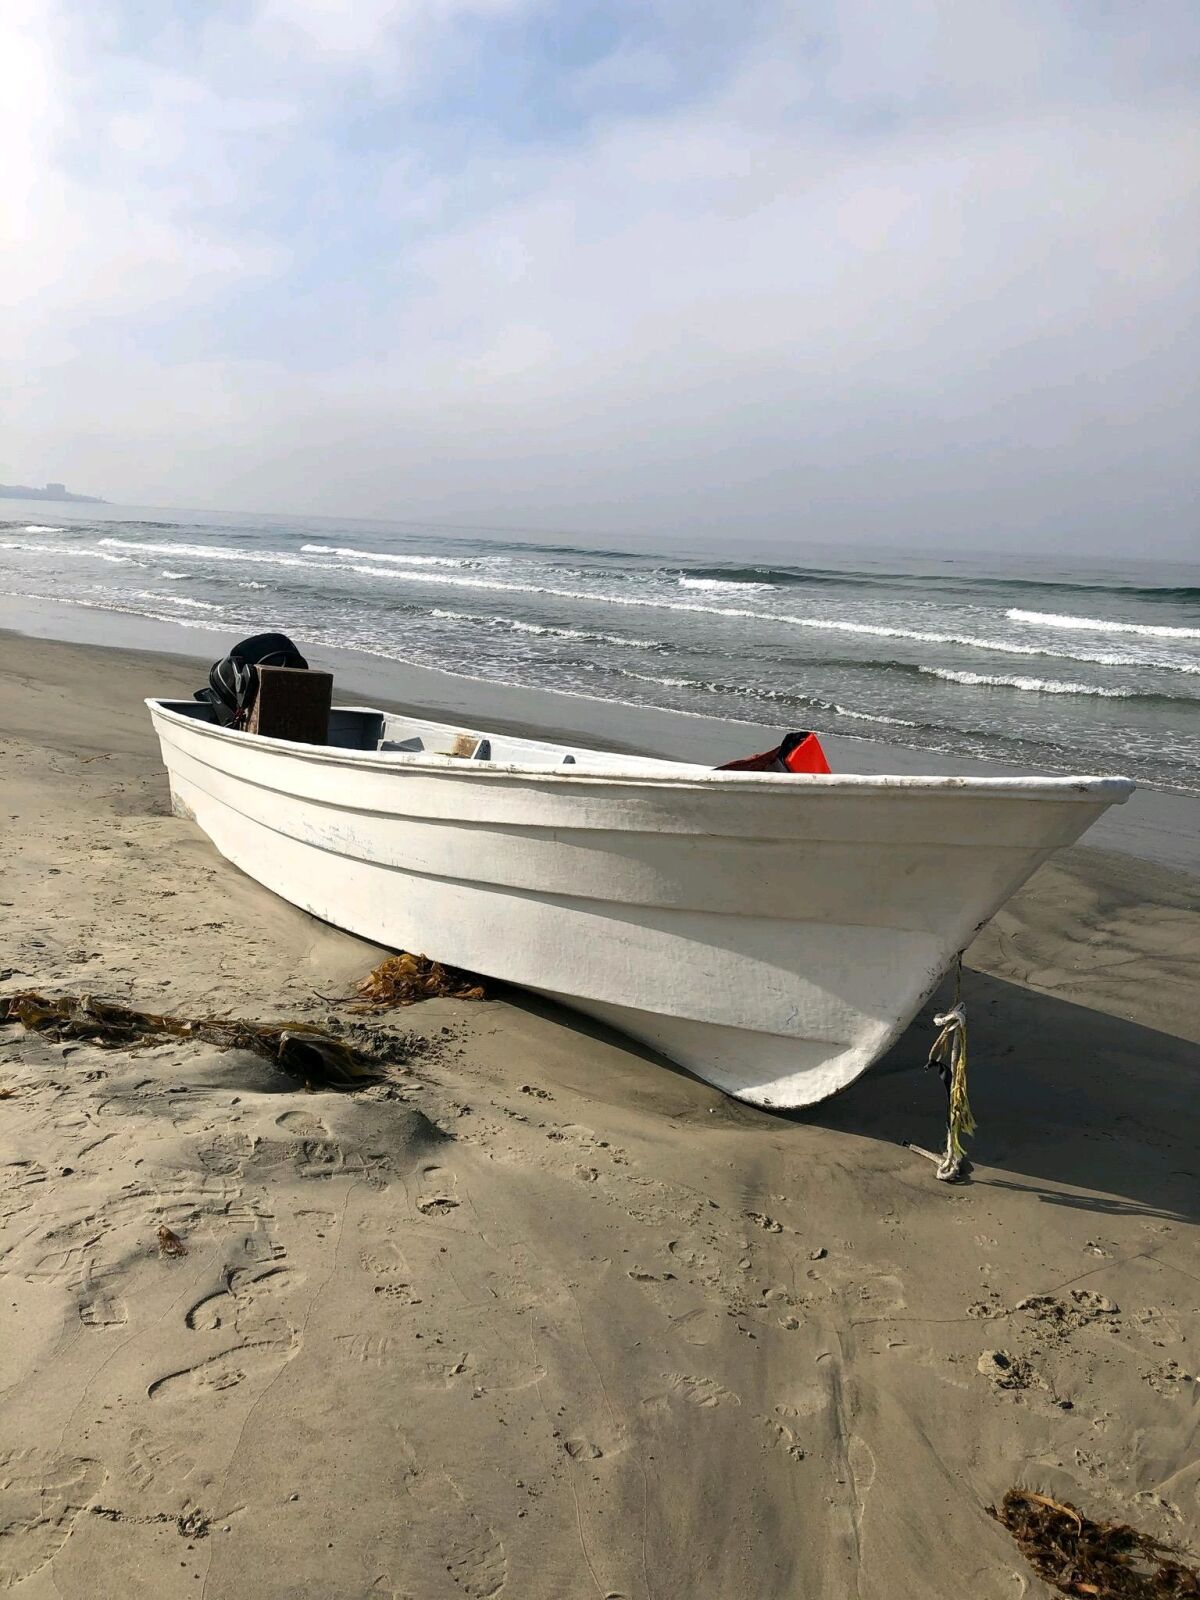 Six people were arrested early Wednesday morning after a suspected smuggling boat was beached on San Diego's Black’s Beach. The migrants tried to escape by climbing the cliffs near Torrey Pines, according to San Diego lifeguards and Border Patrol.